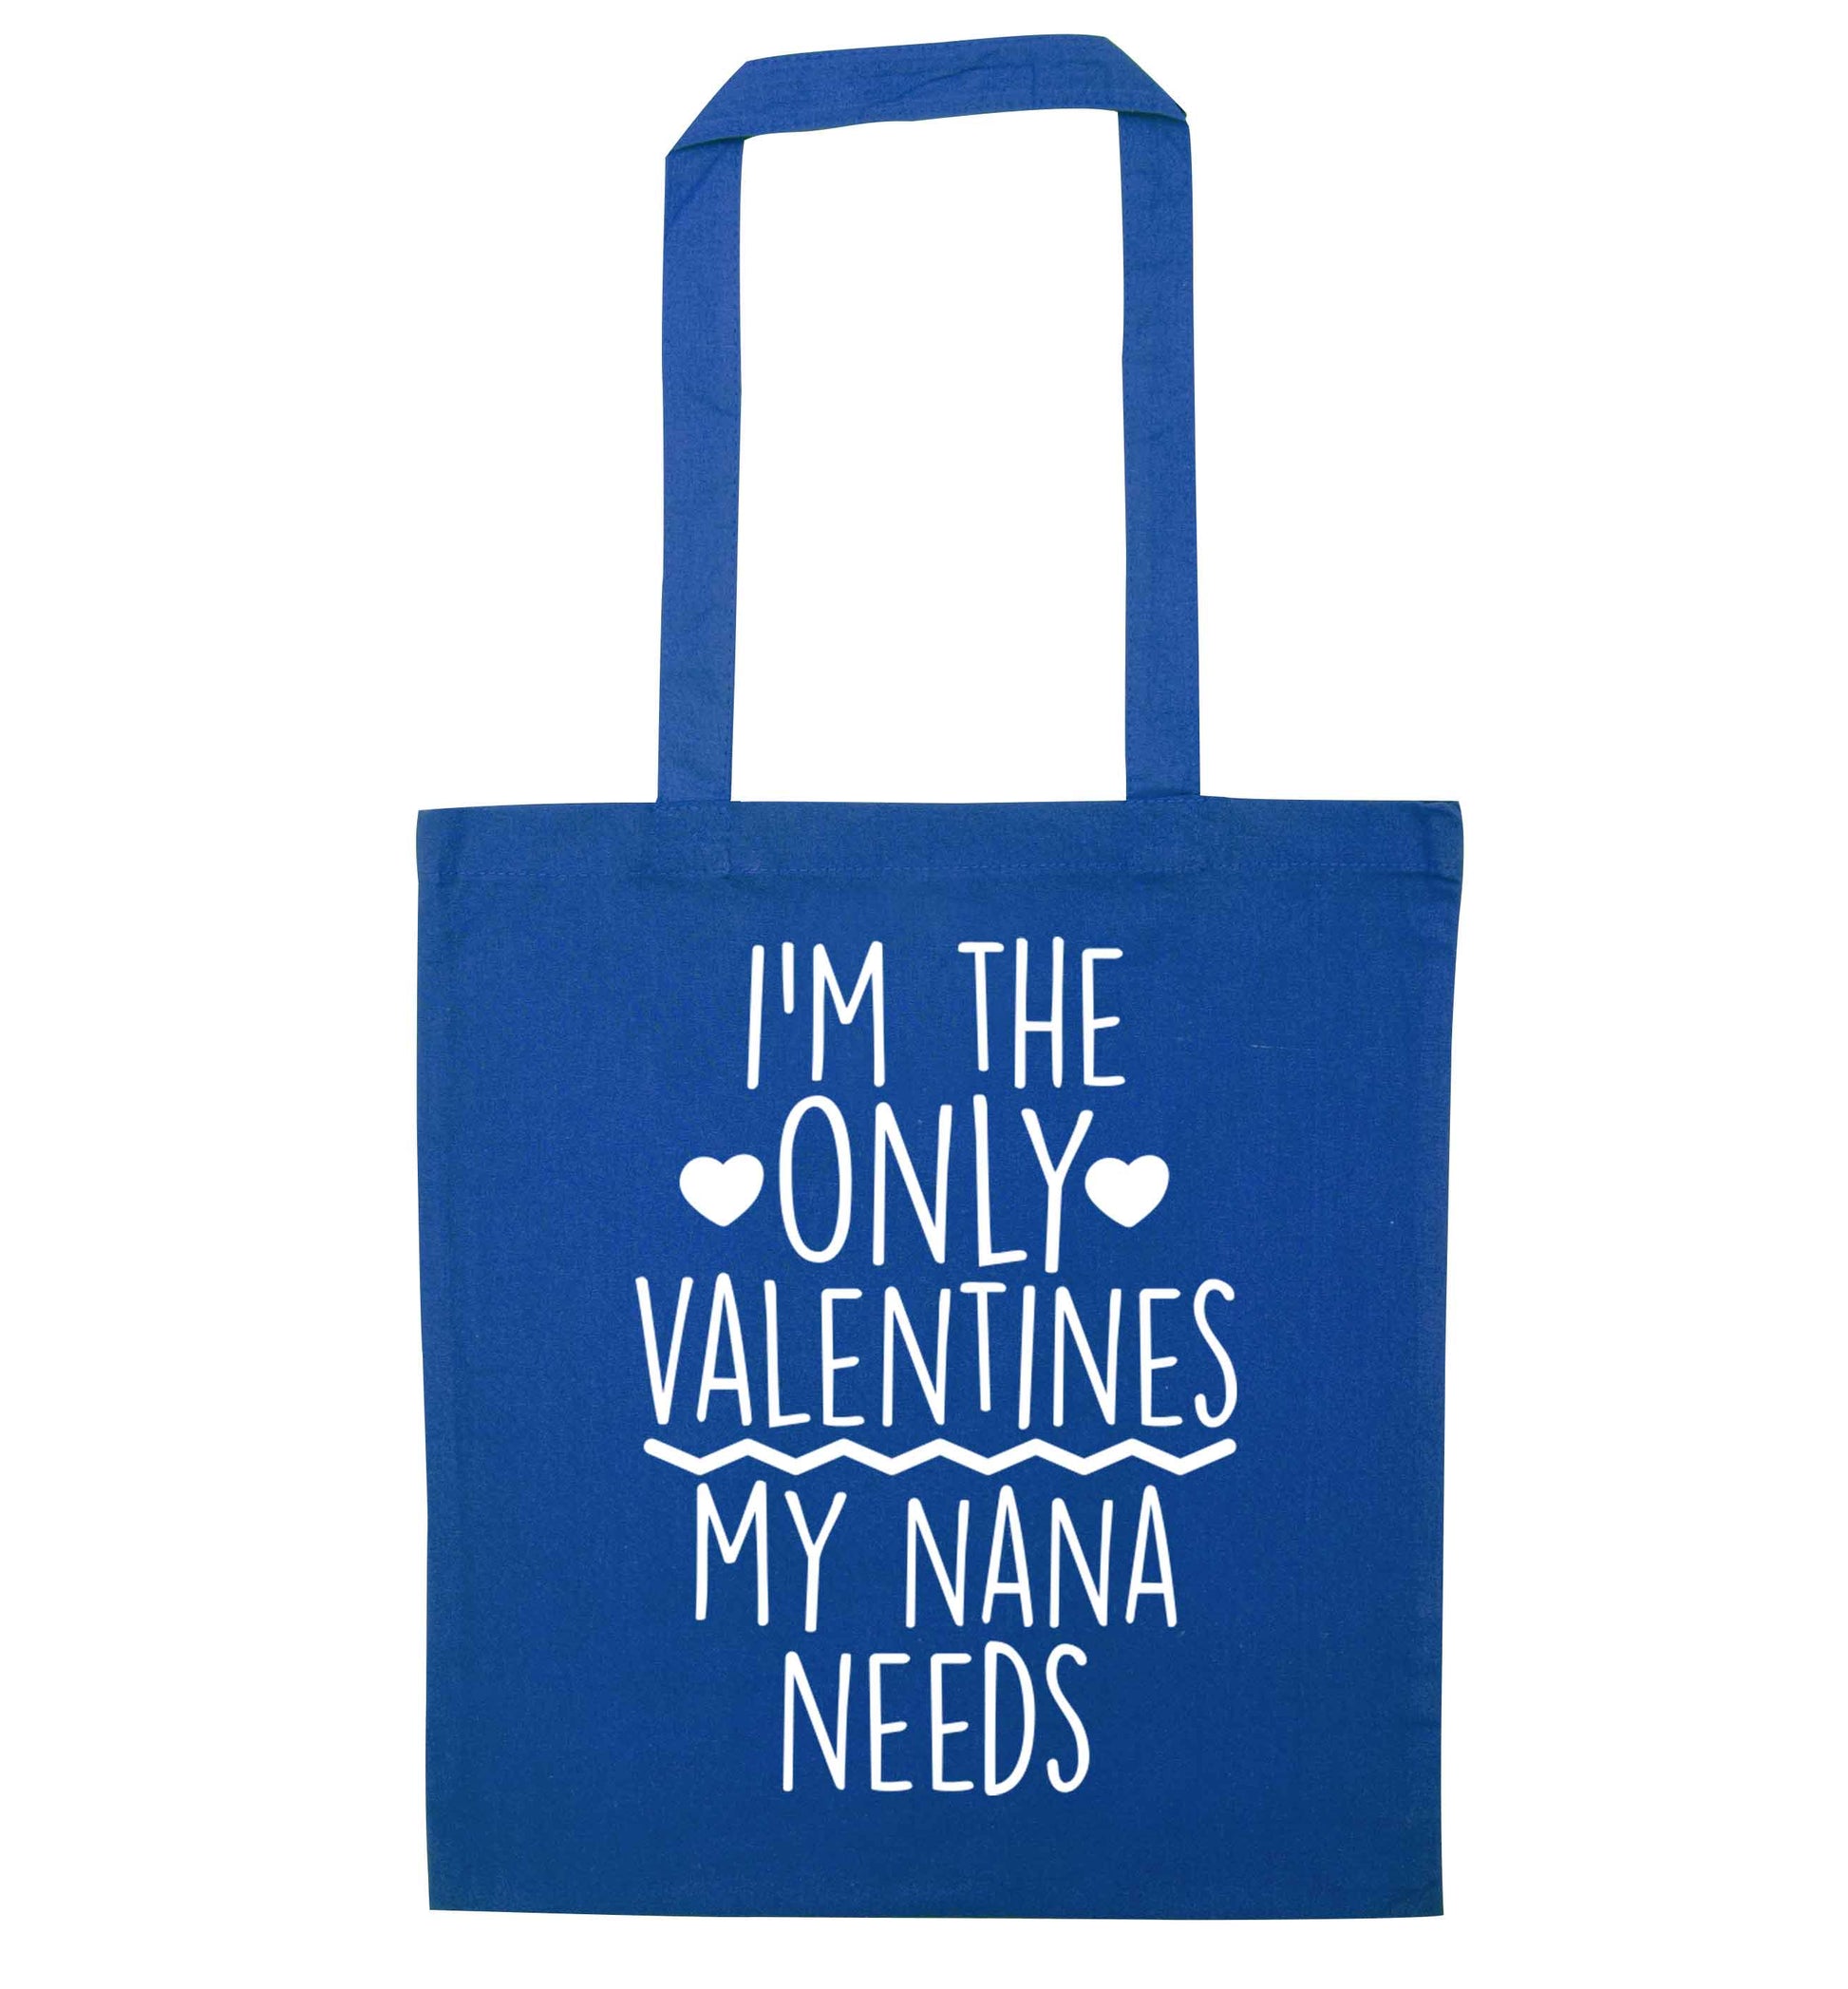 I'm the only valentines my nana needs blue tote bag